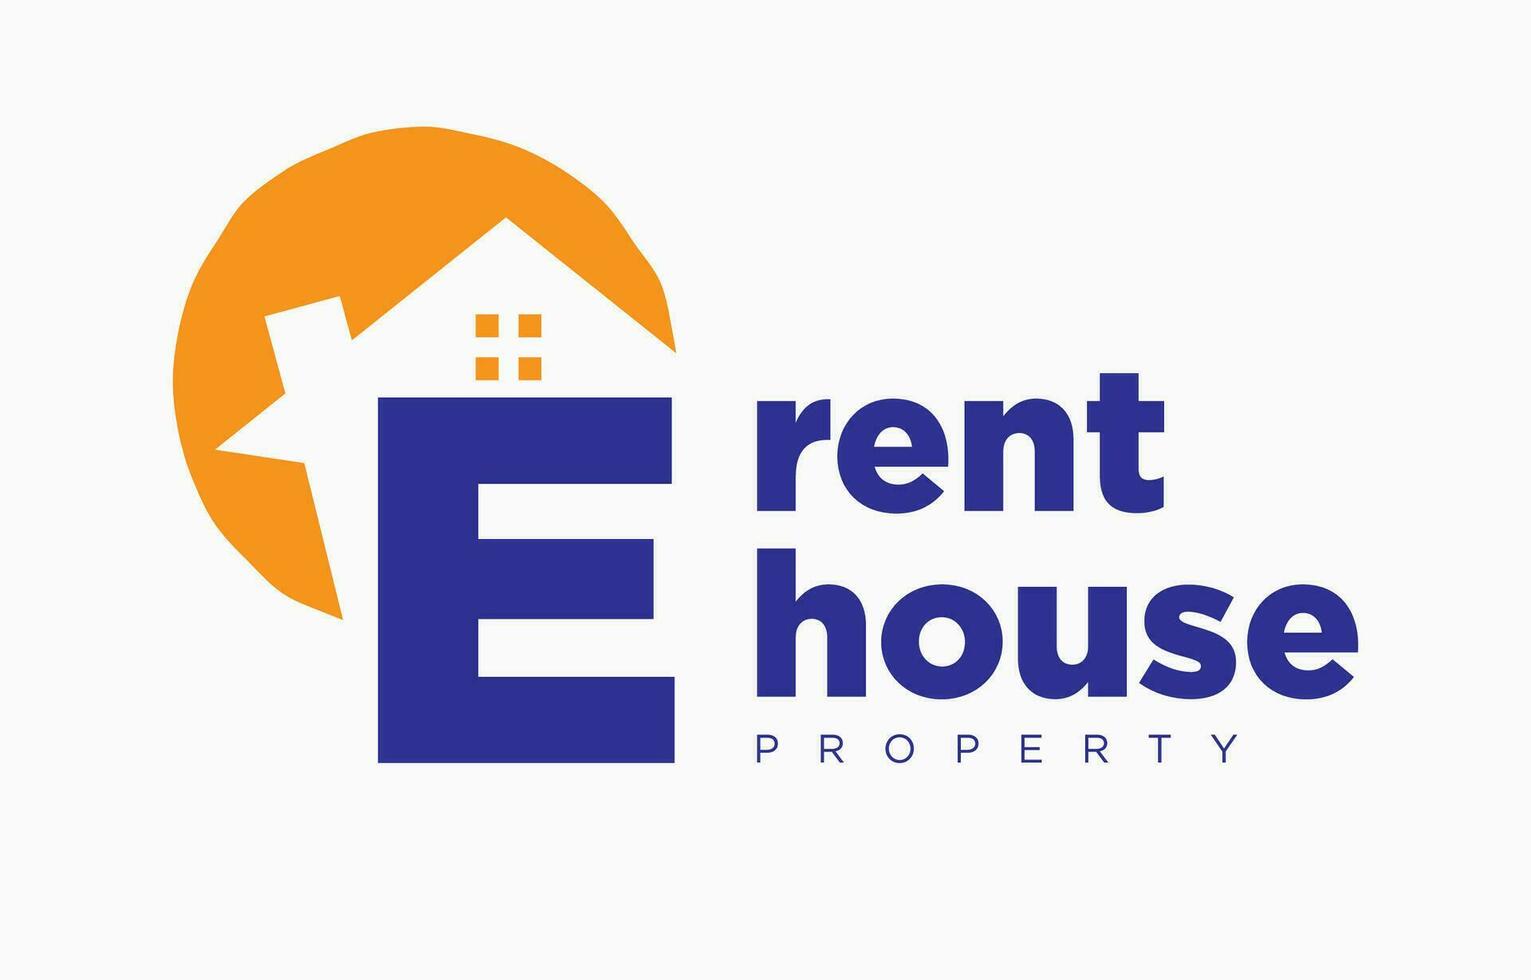 letter E house and sun vector design element for real estate logo or realty exhibition